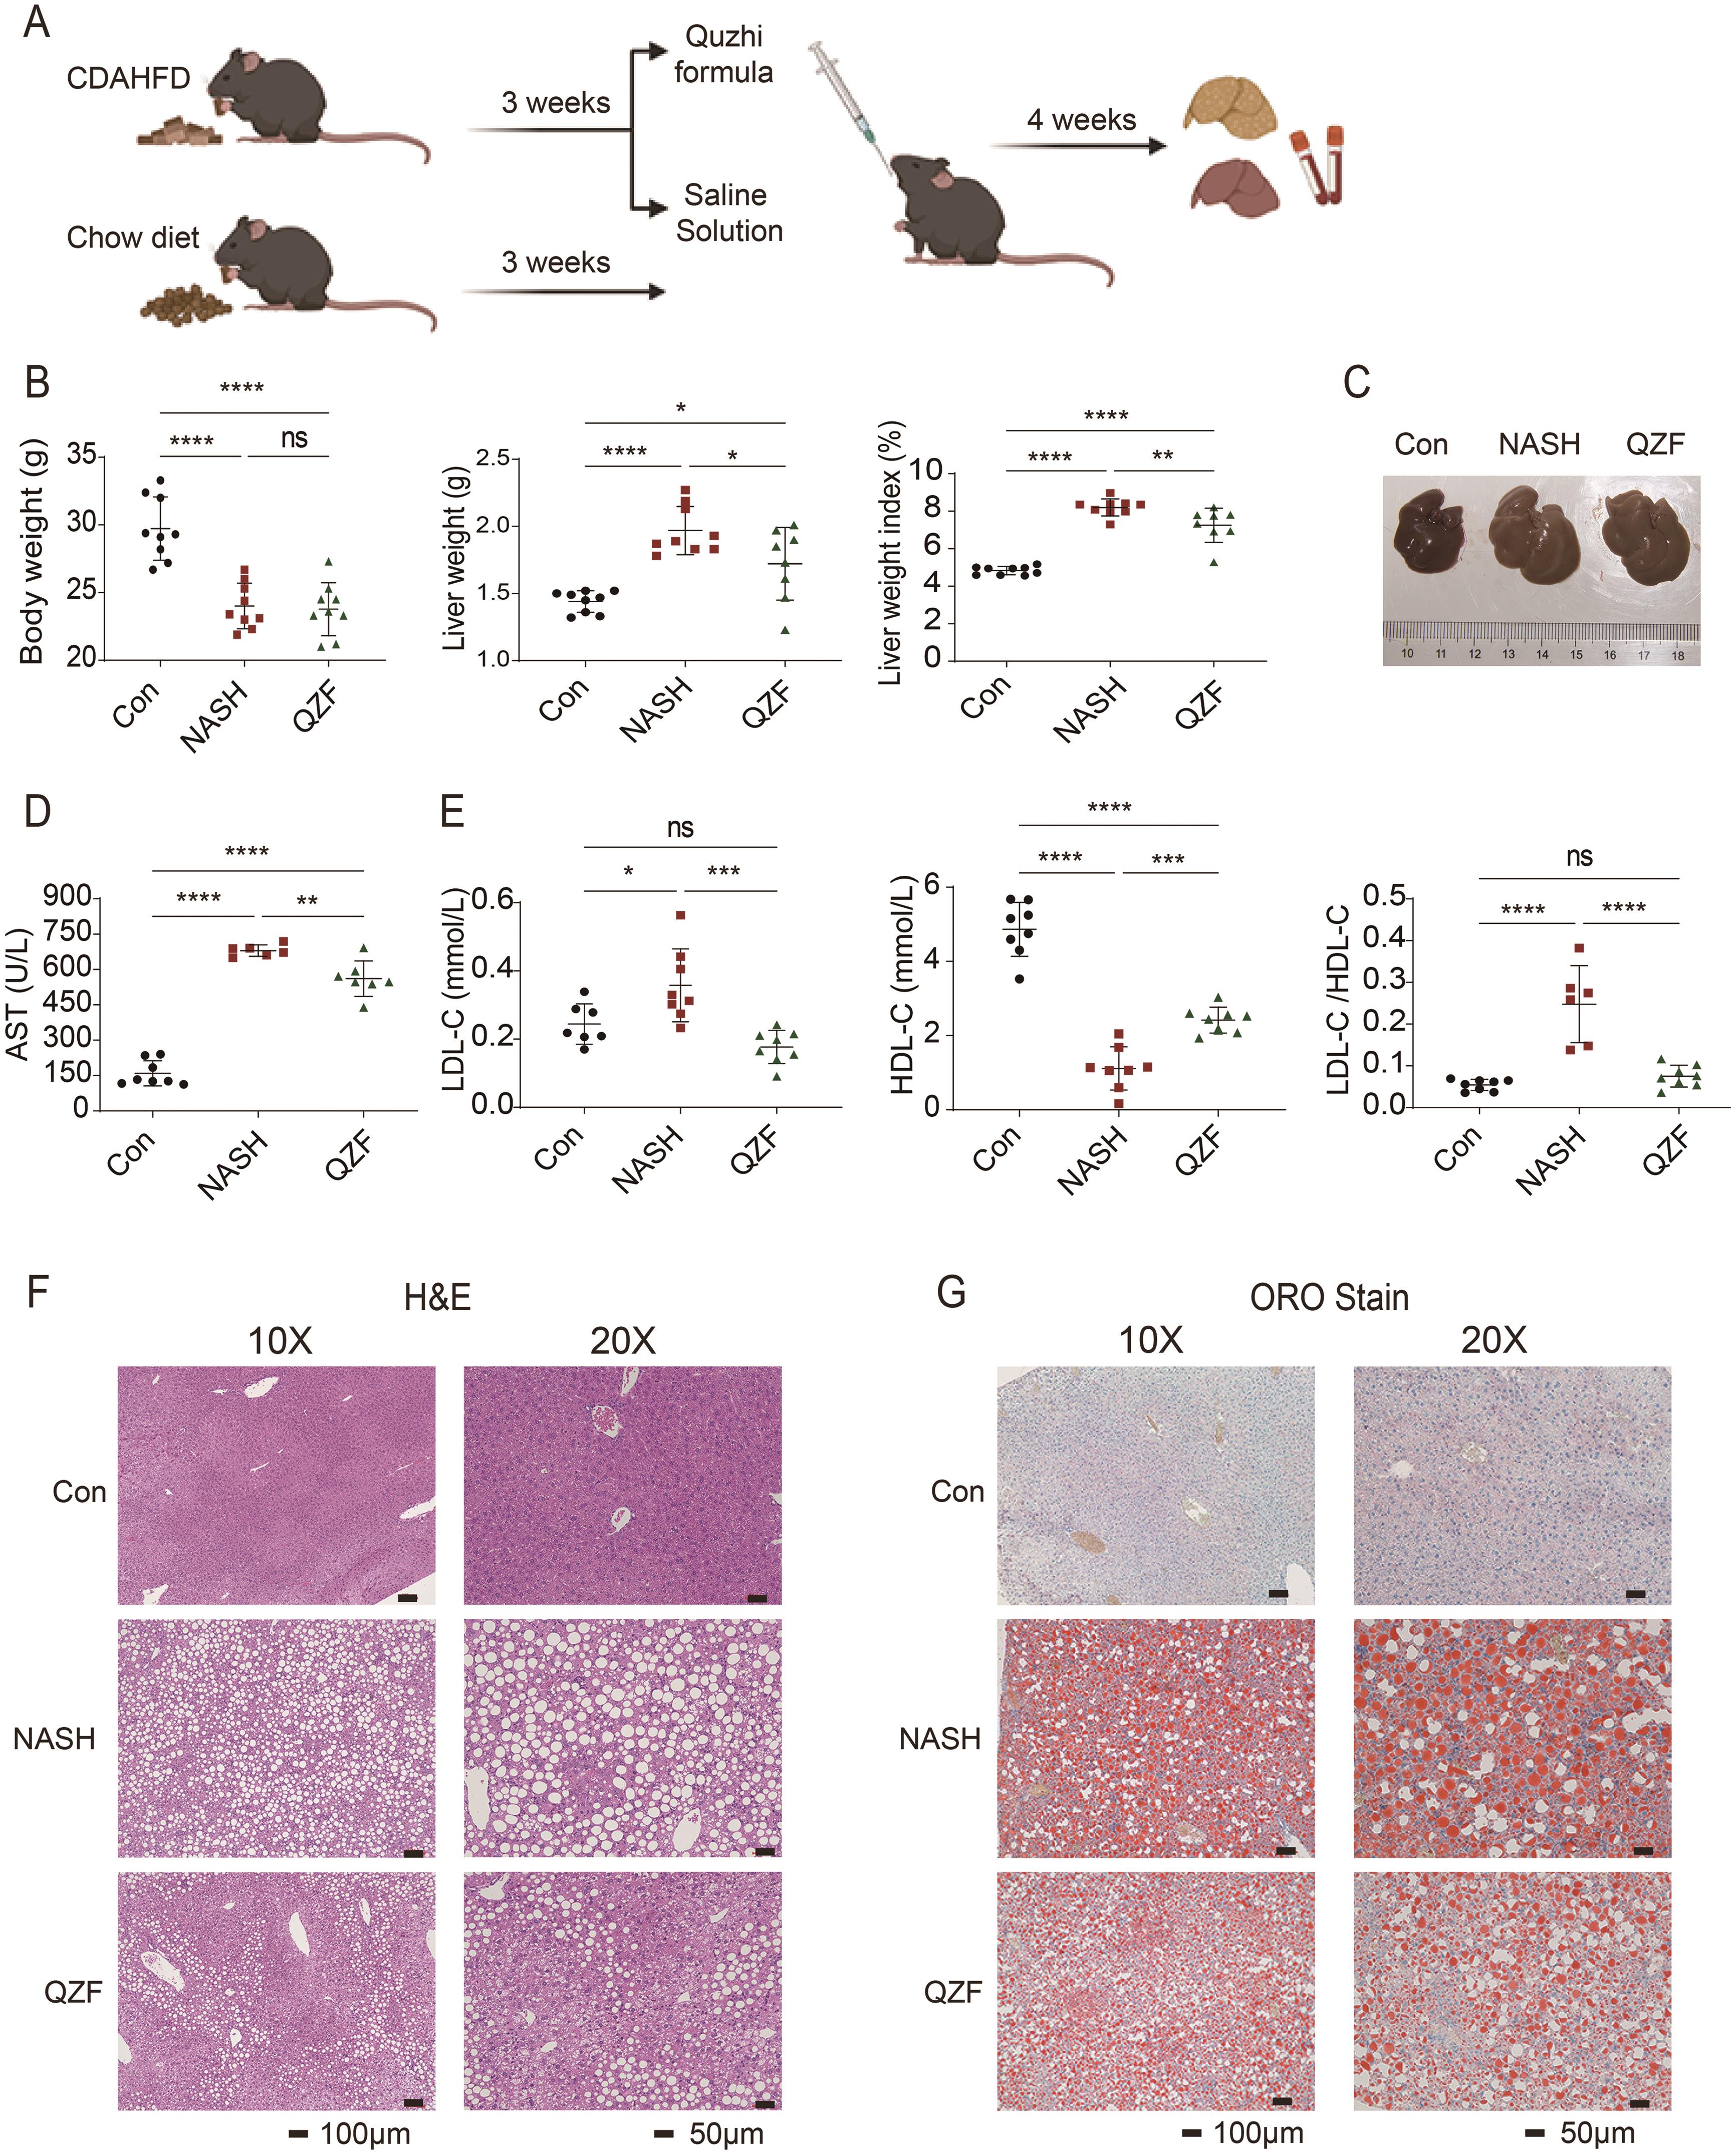 Quzhi formula alleviation of hepatic steatosis in NASH mice.